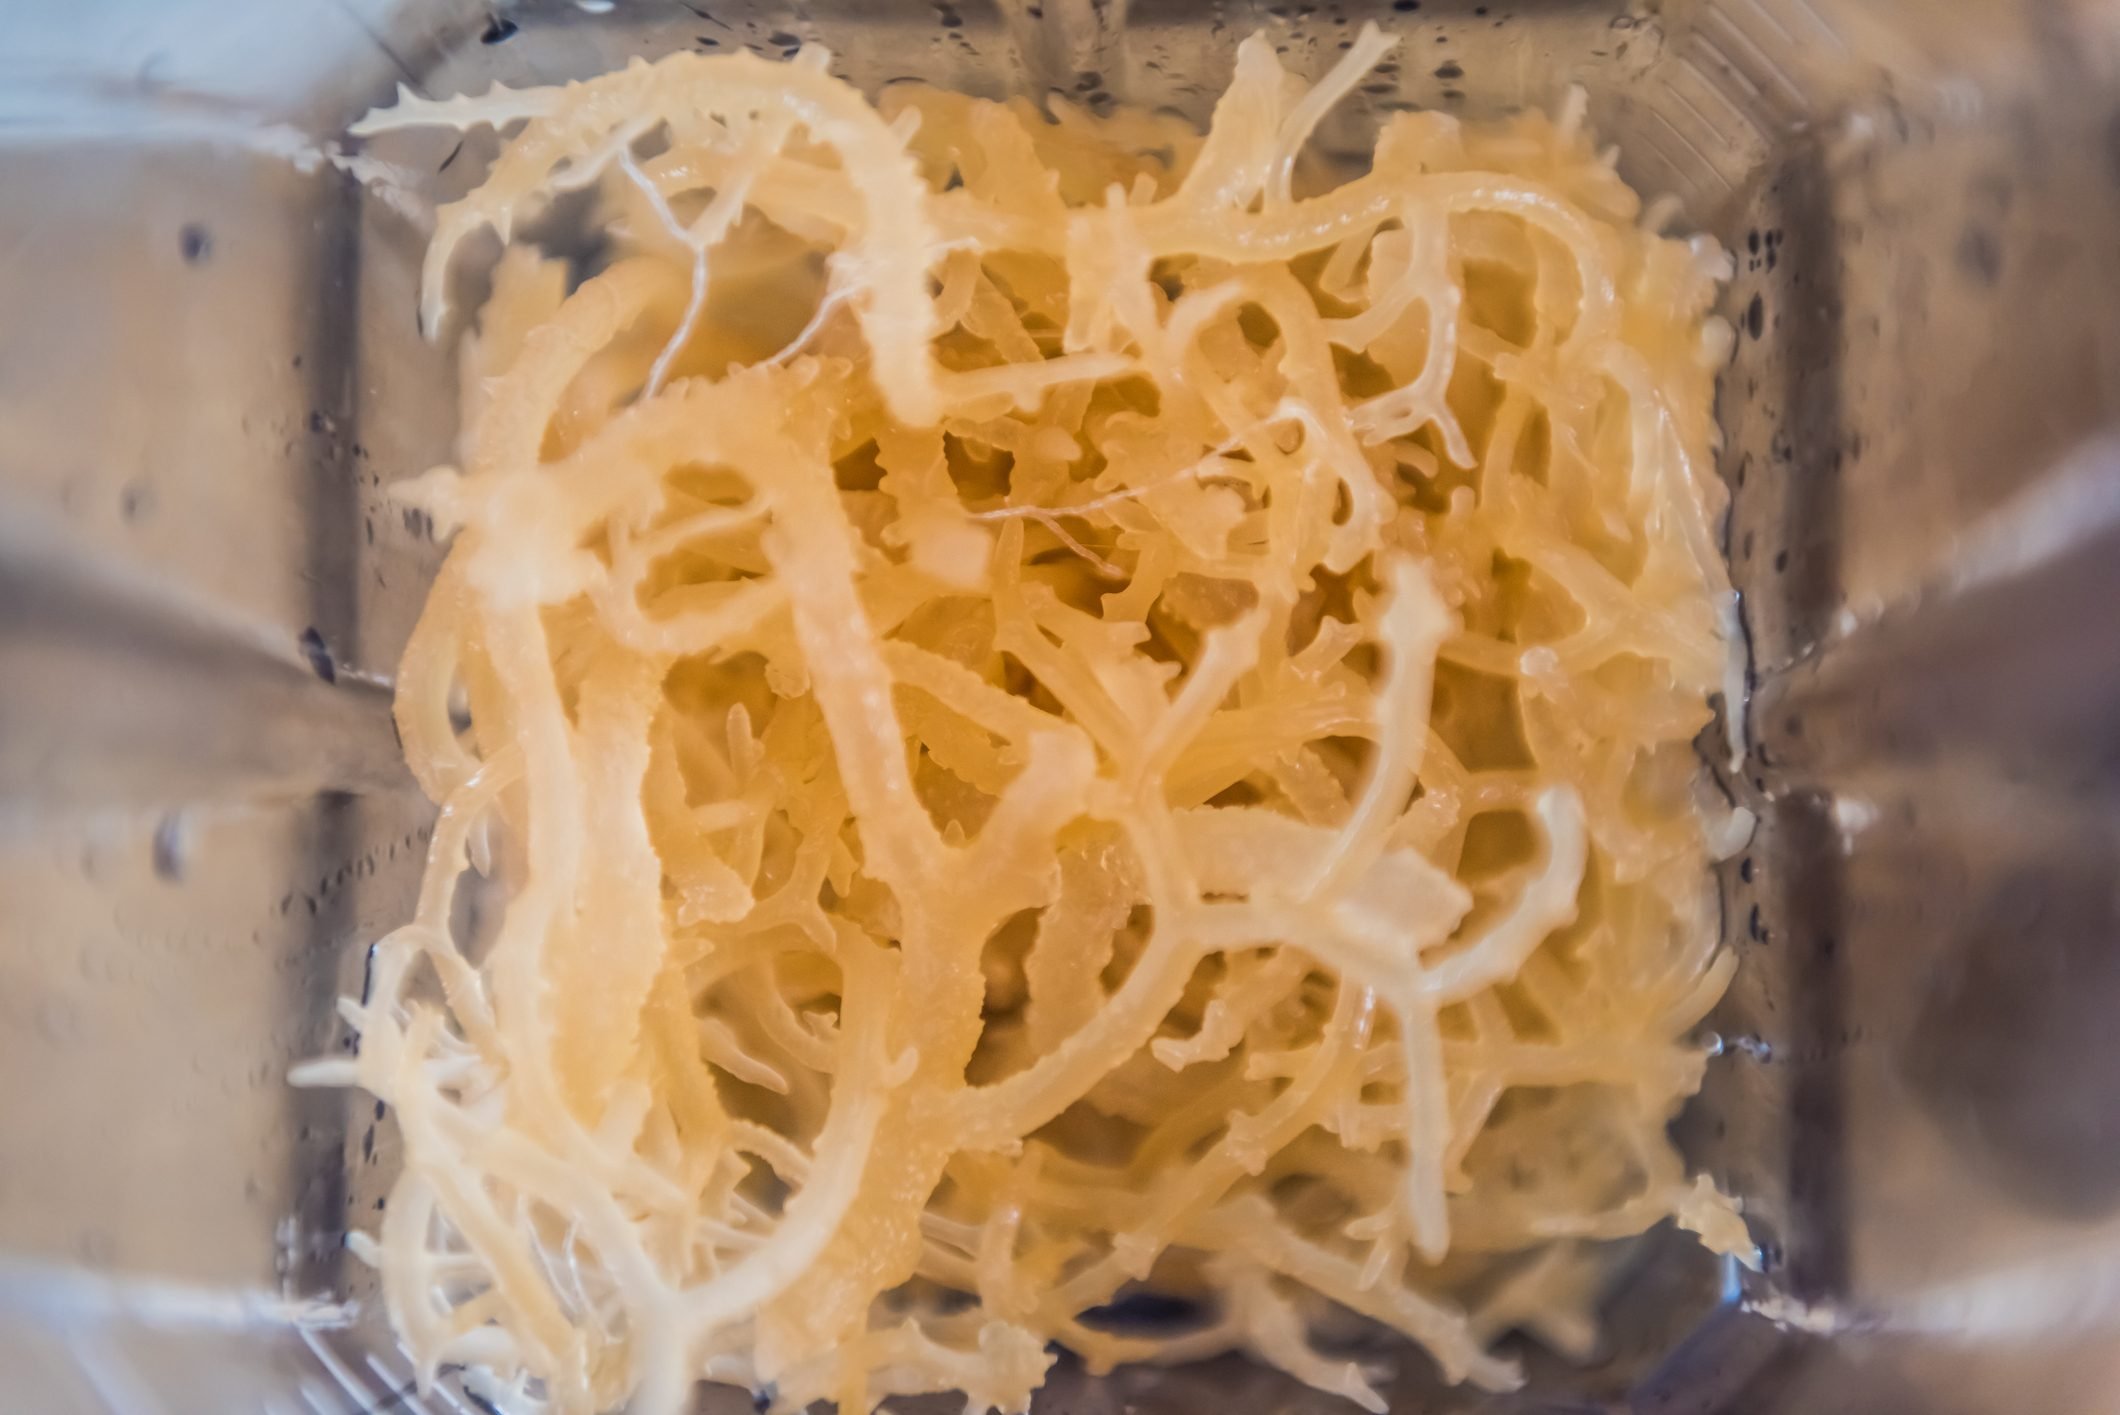 Sea Moss Benefits and How to Use It